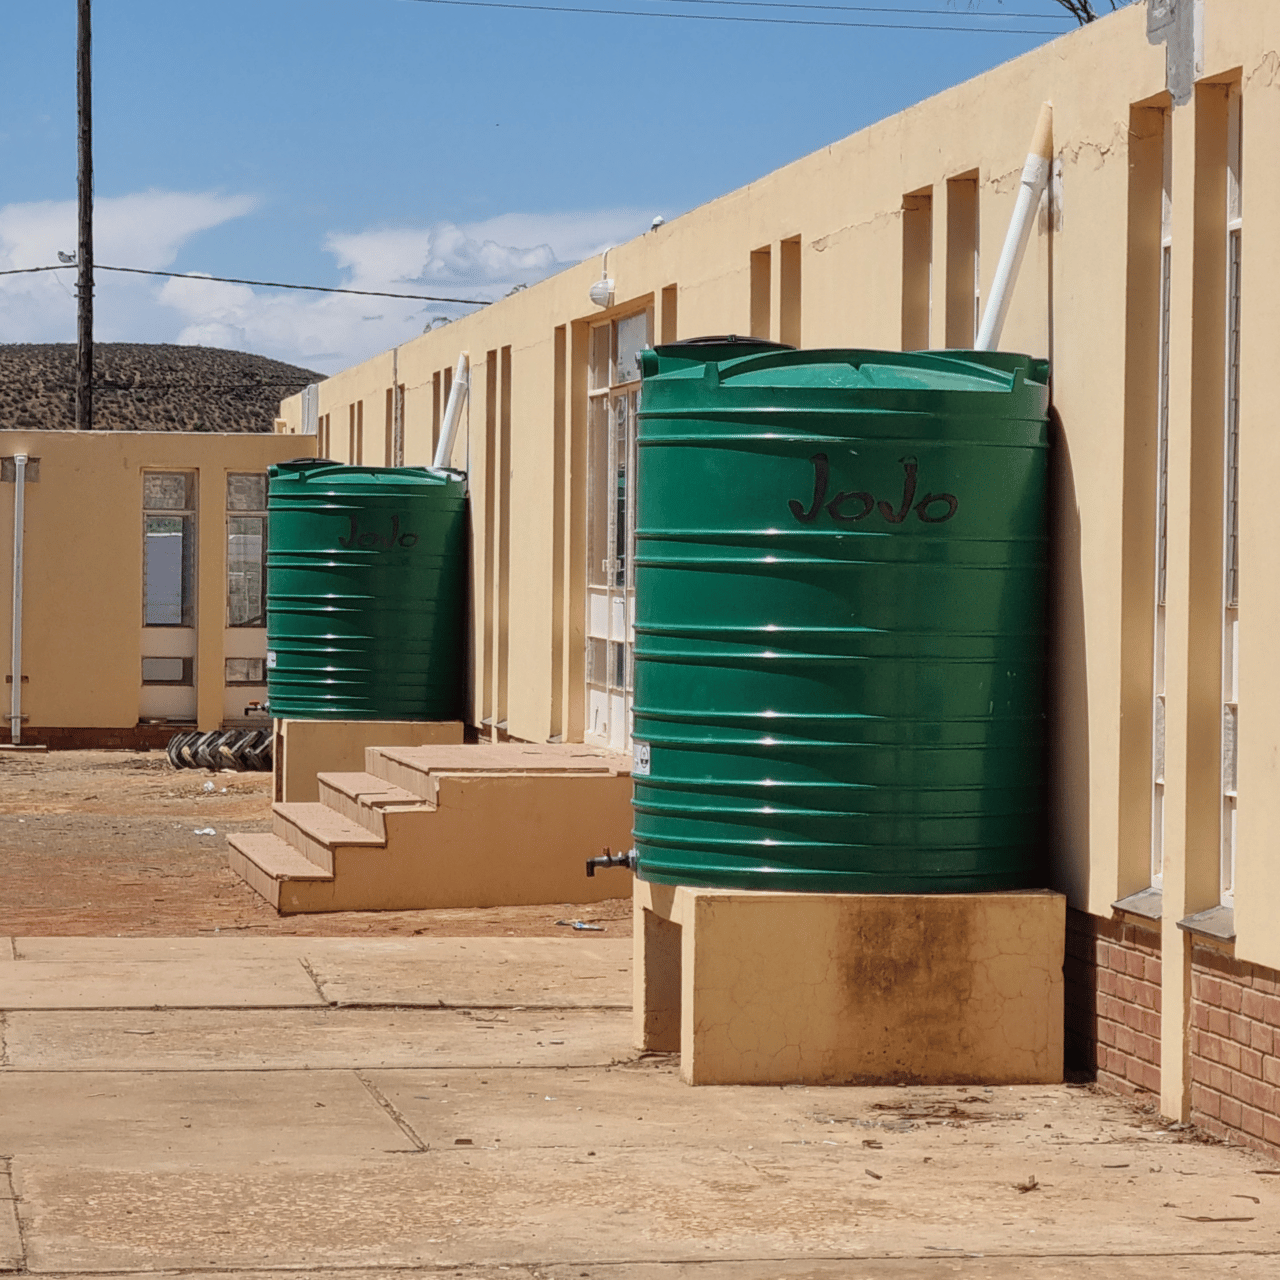 local worker installs new toilets and asbestos-free water containers